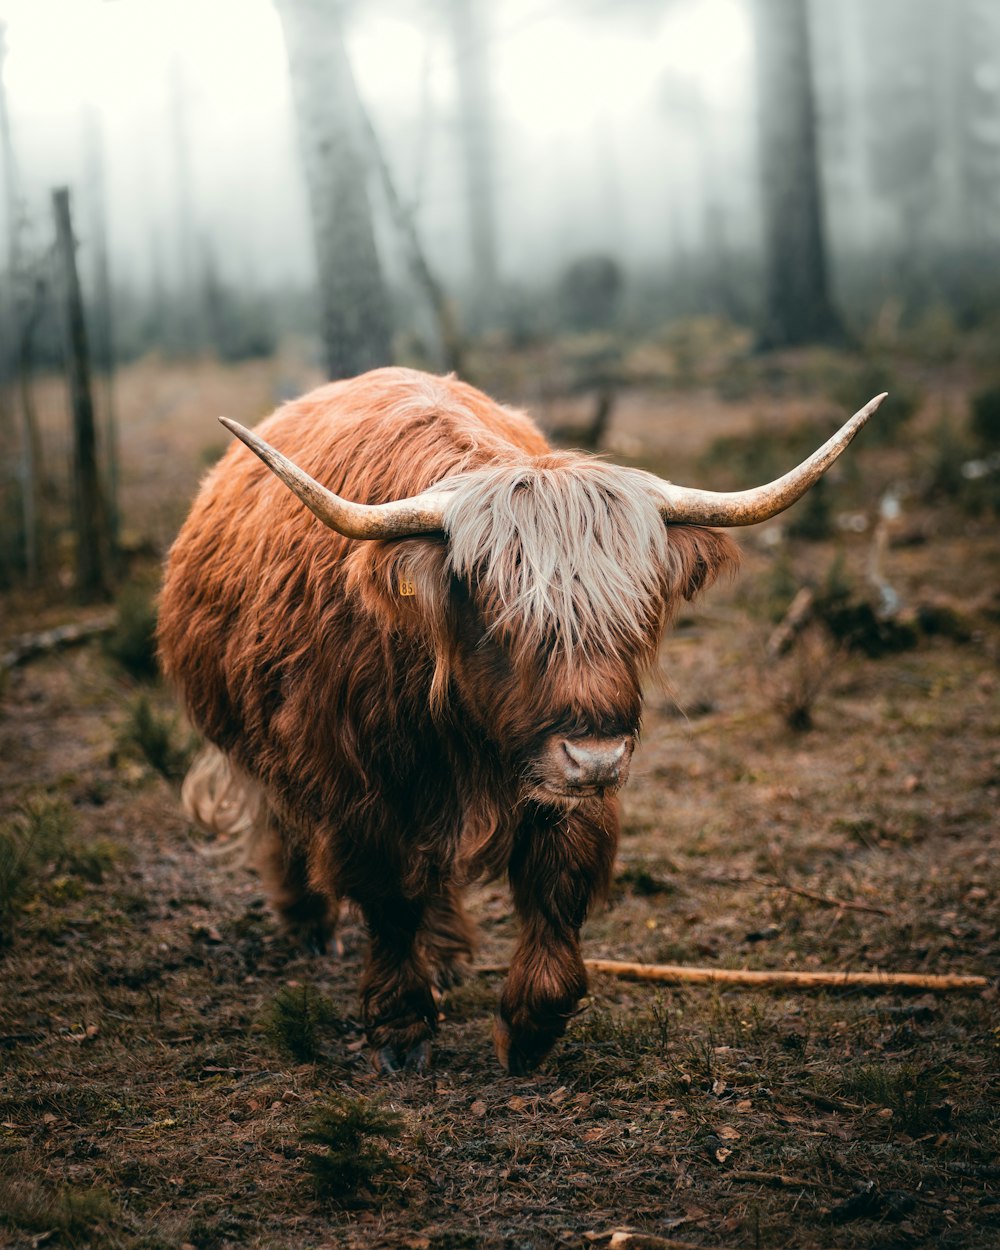 a yak with long horns walking through a forest